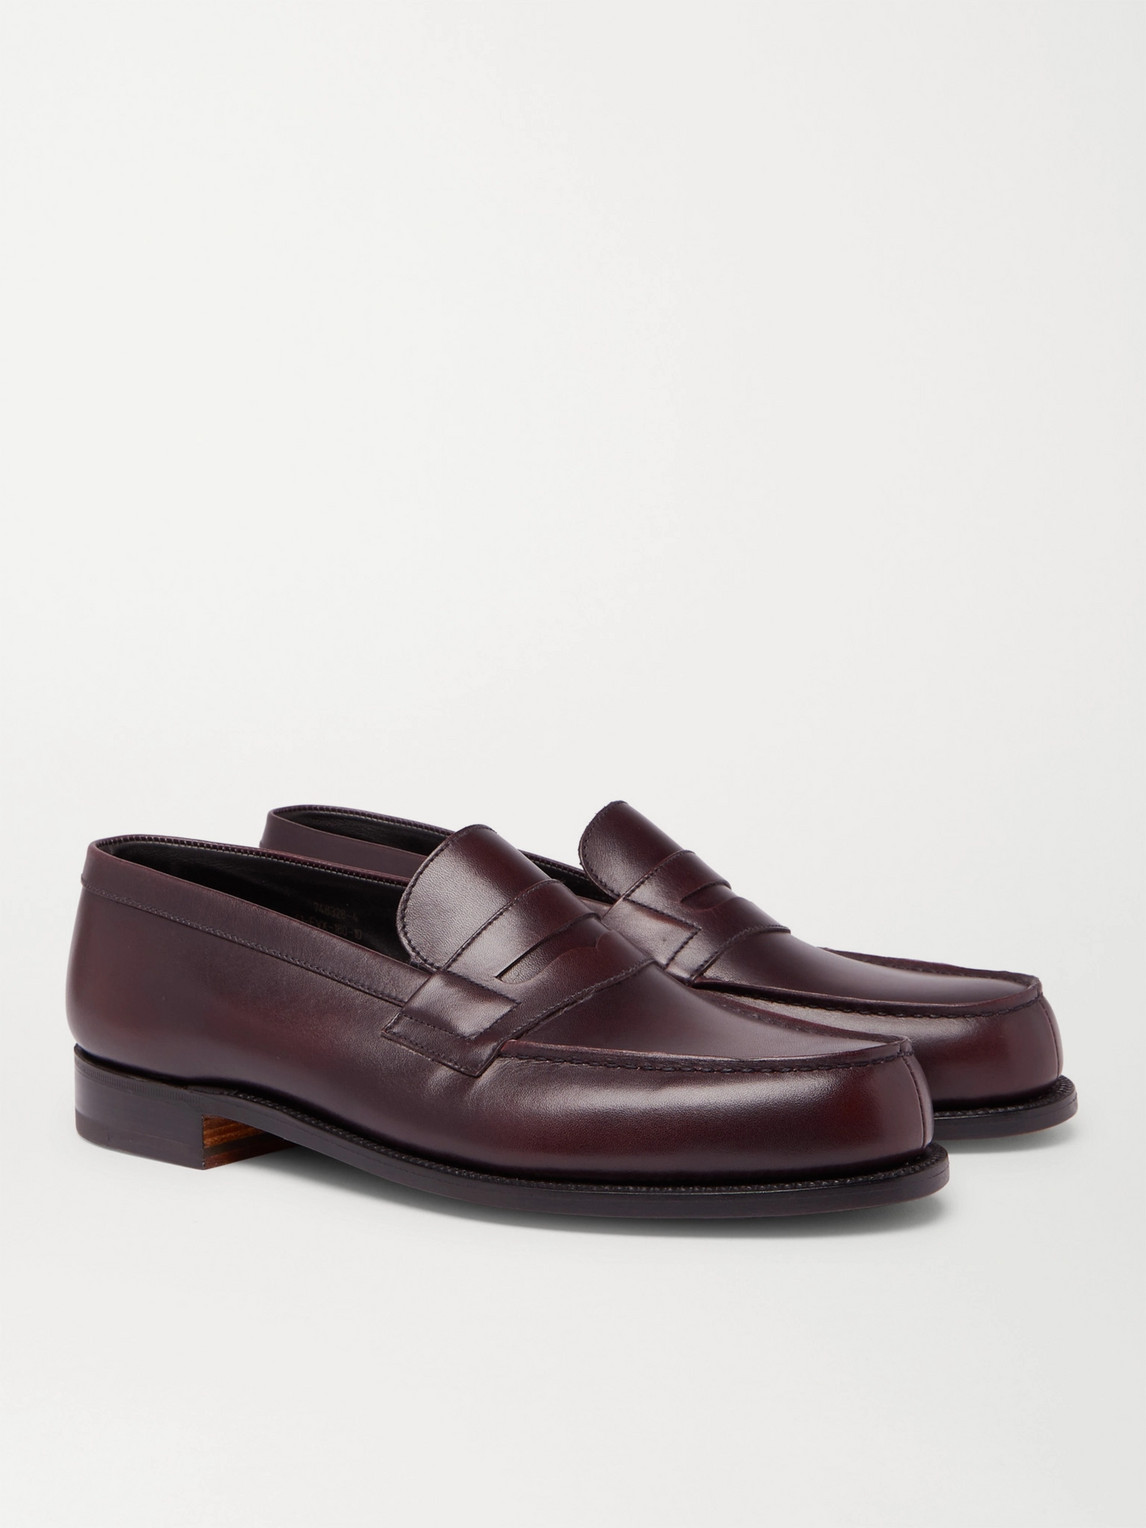 Jm Weston 180 The Moccasin Burnished-leather Penny Loafers In Burgundy